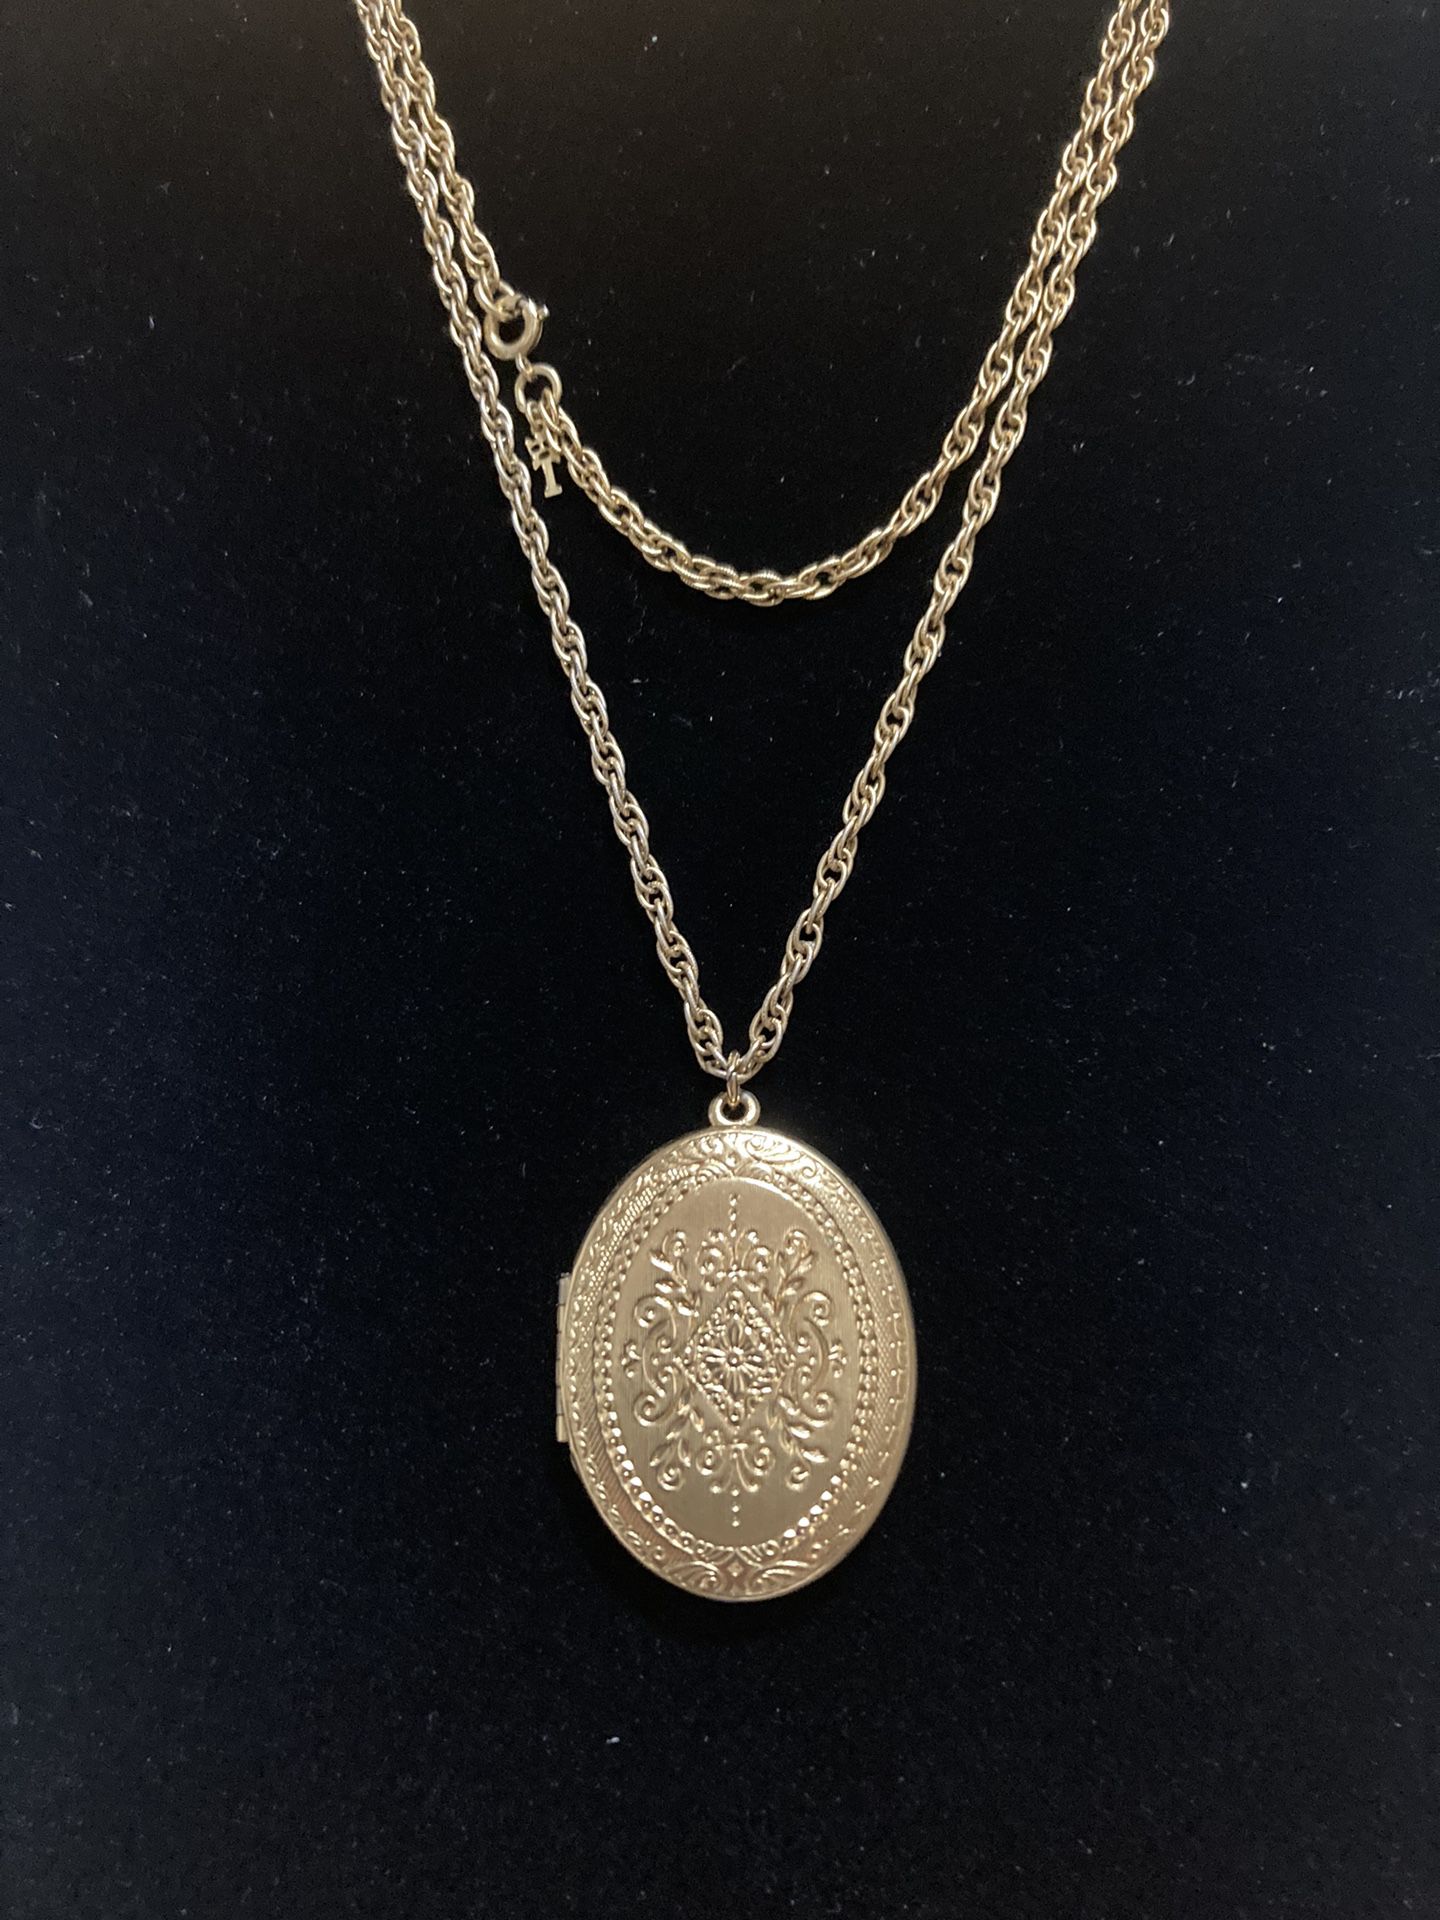 Locket Gold Tone With Chain